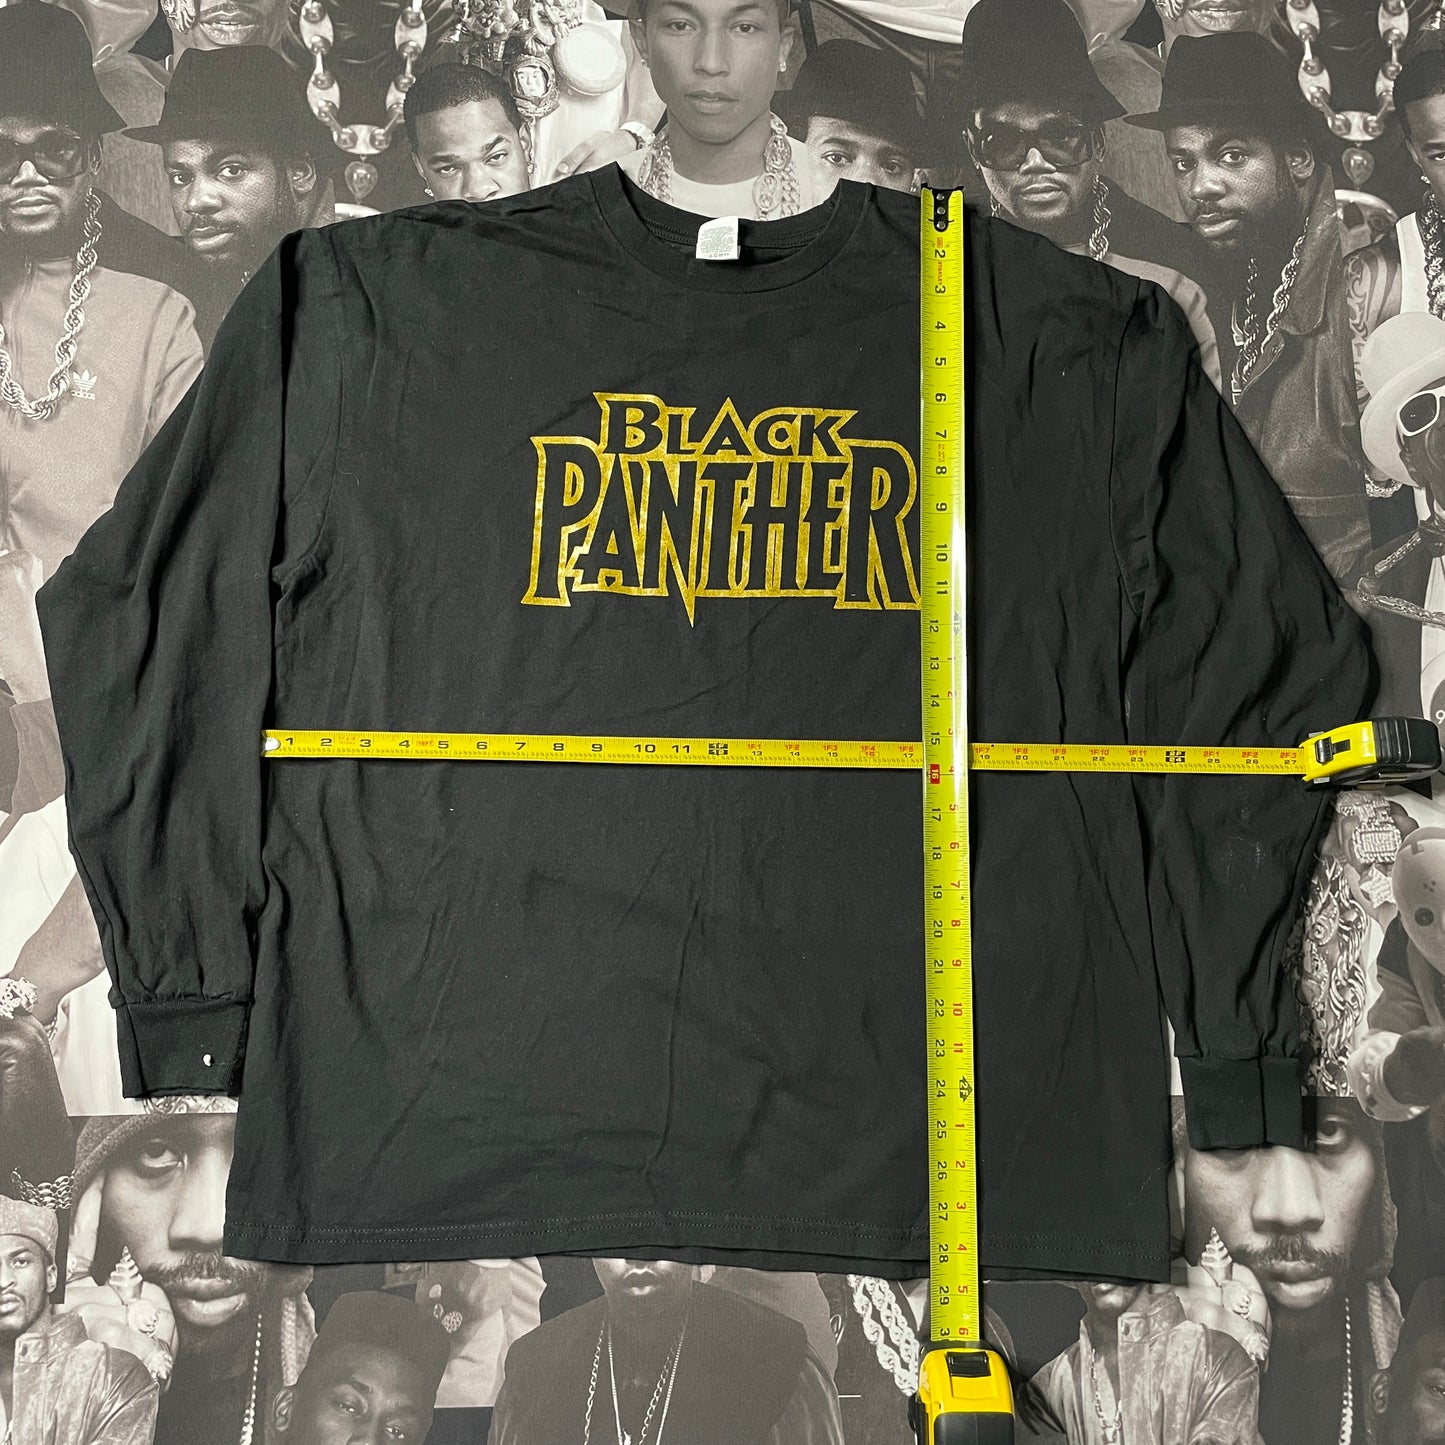 Black Panther Promo Long Sleve Tee in Black Size XL